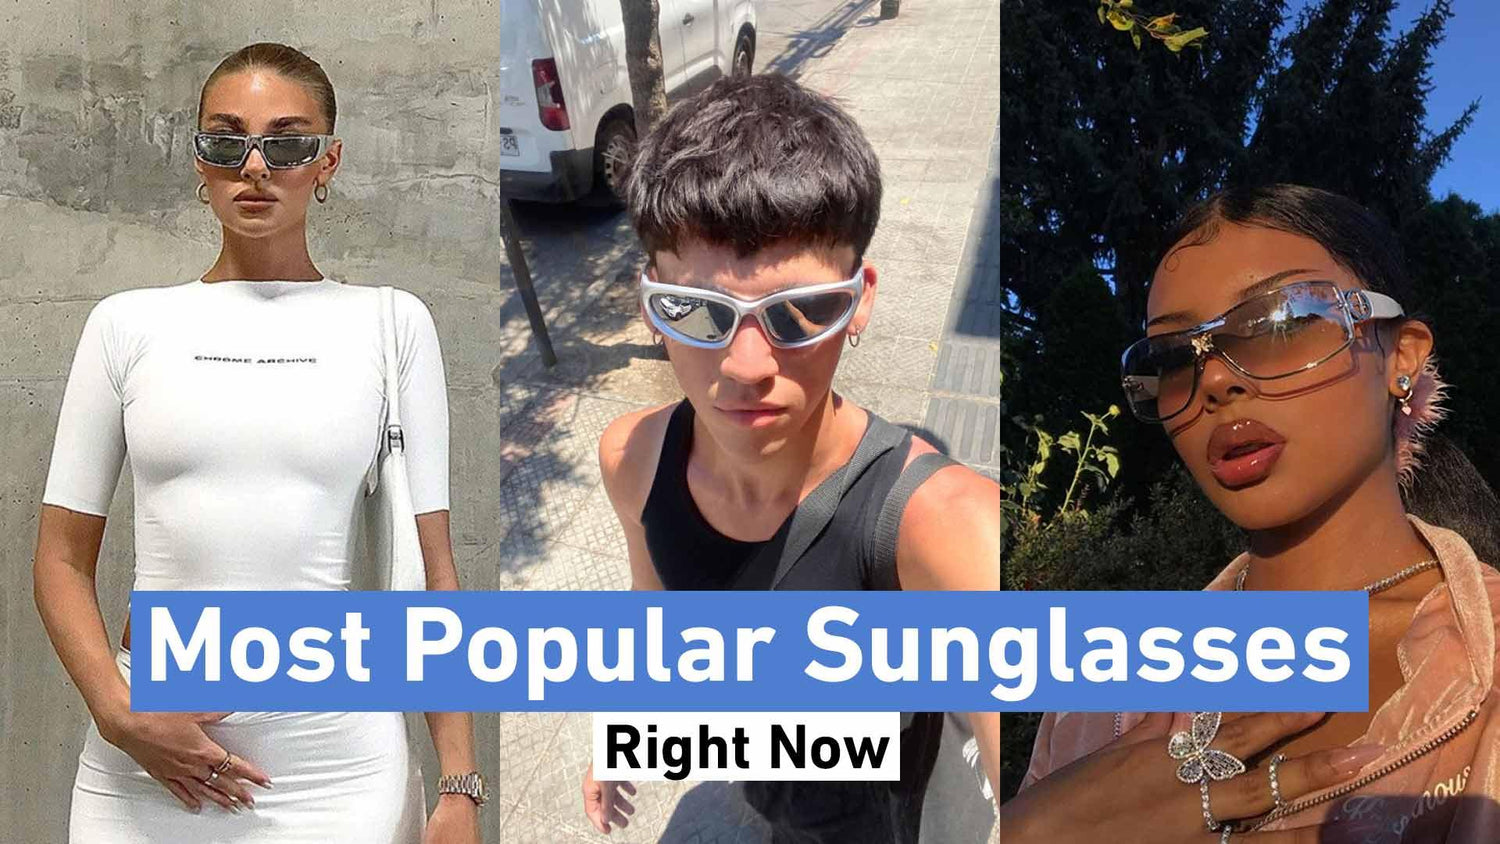 The Most Popular Sunglasses Right Now!